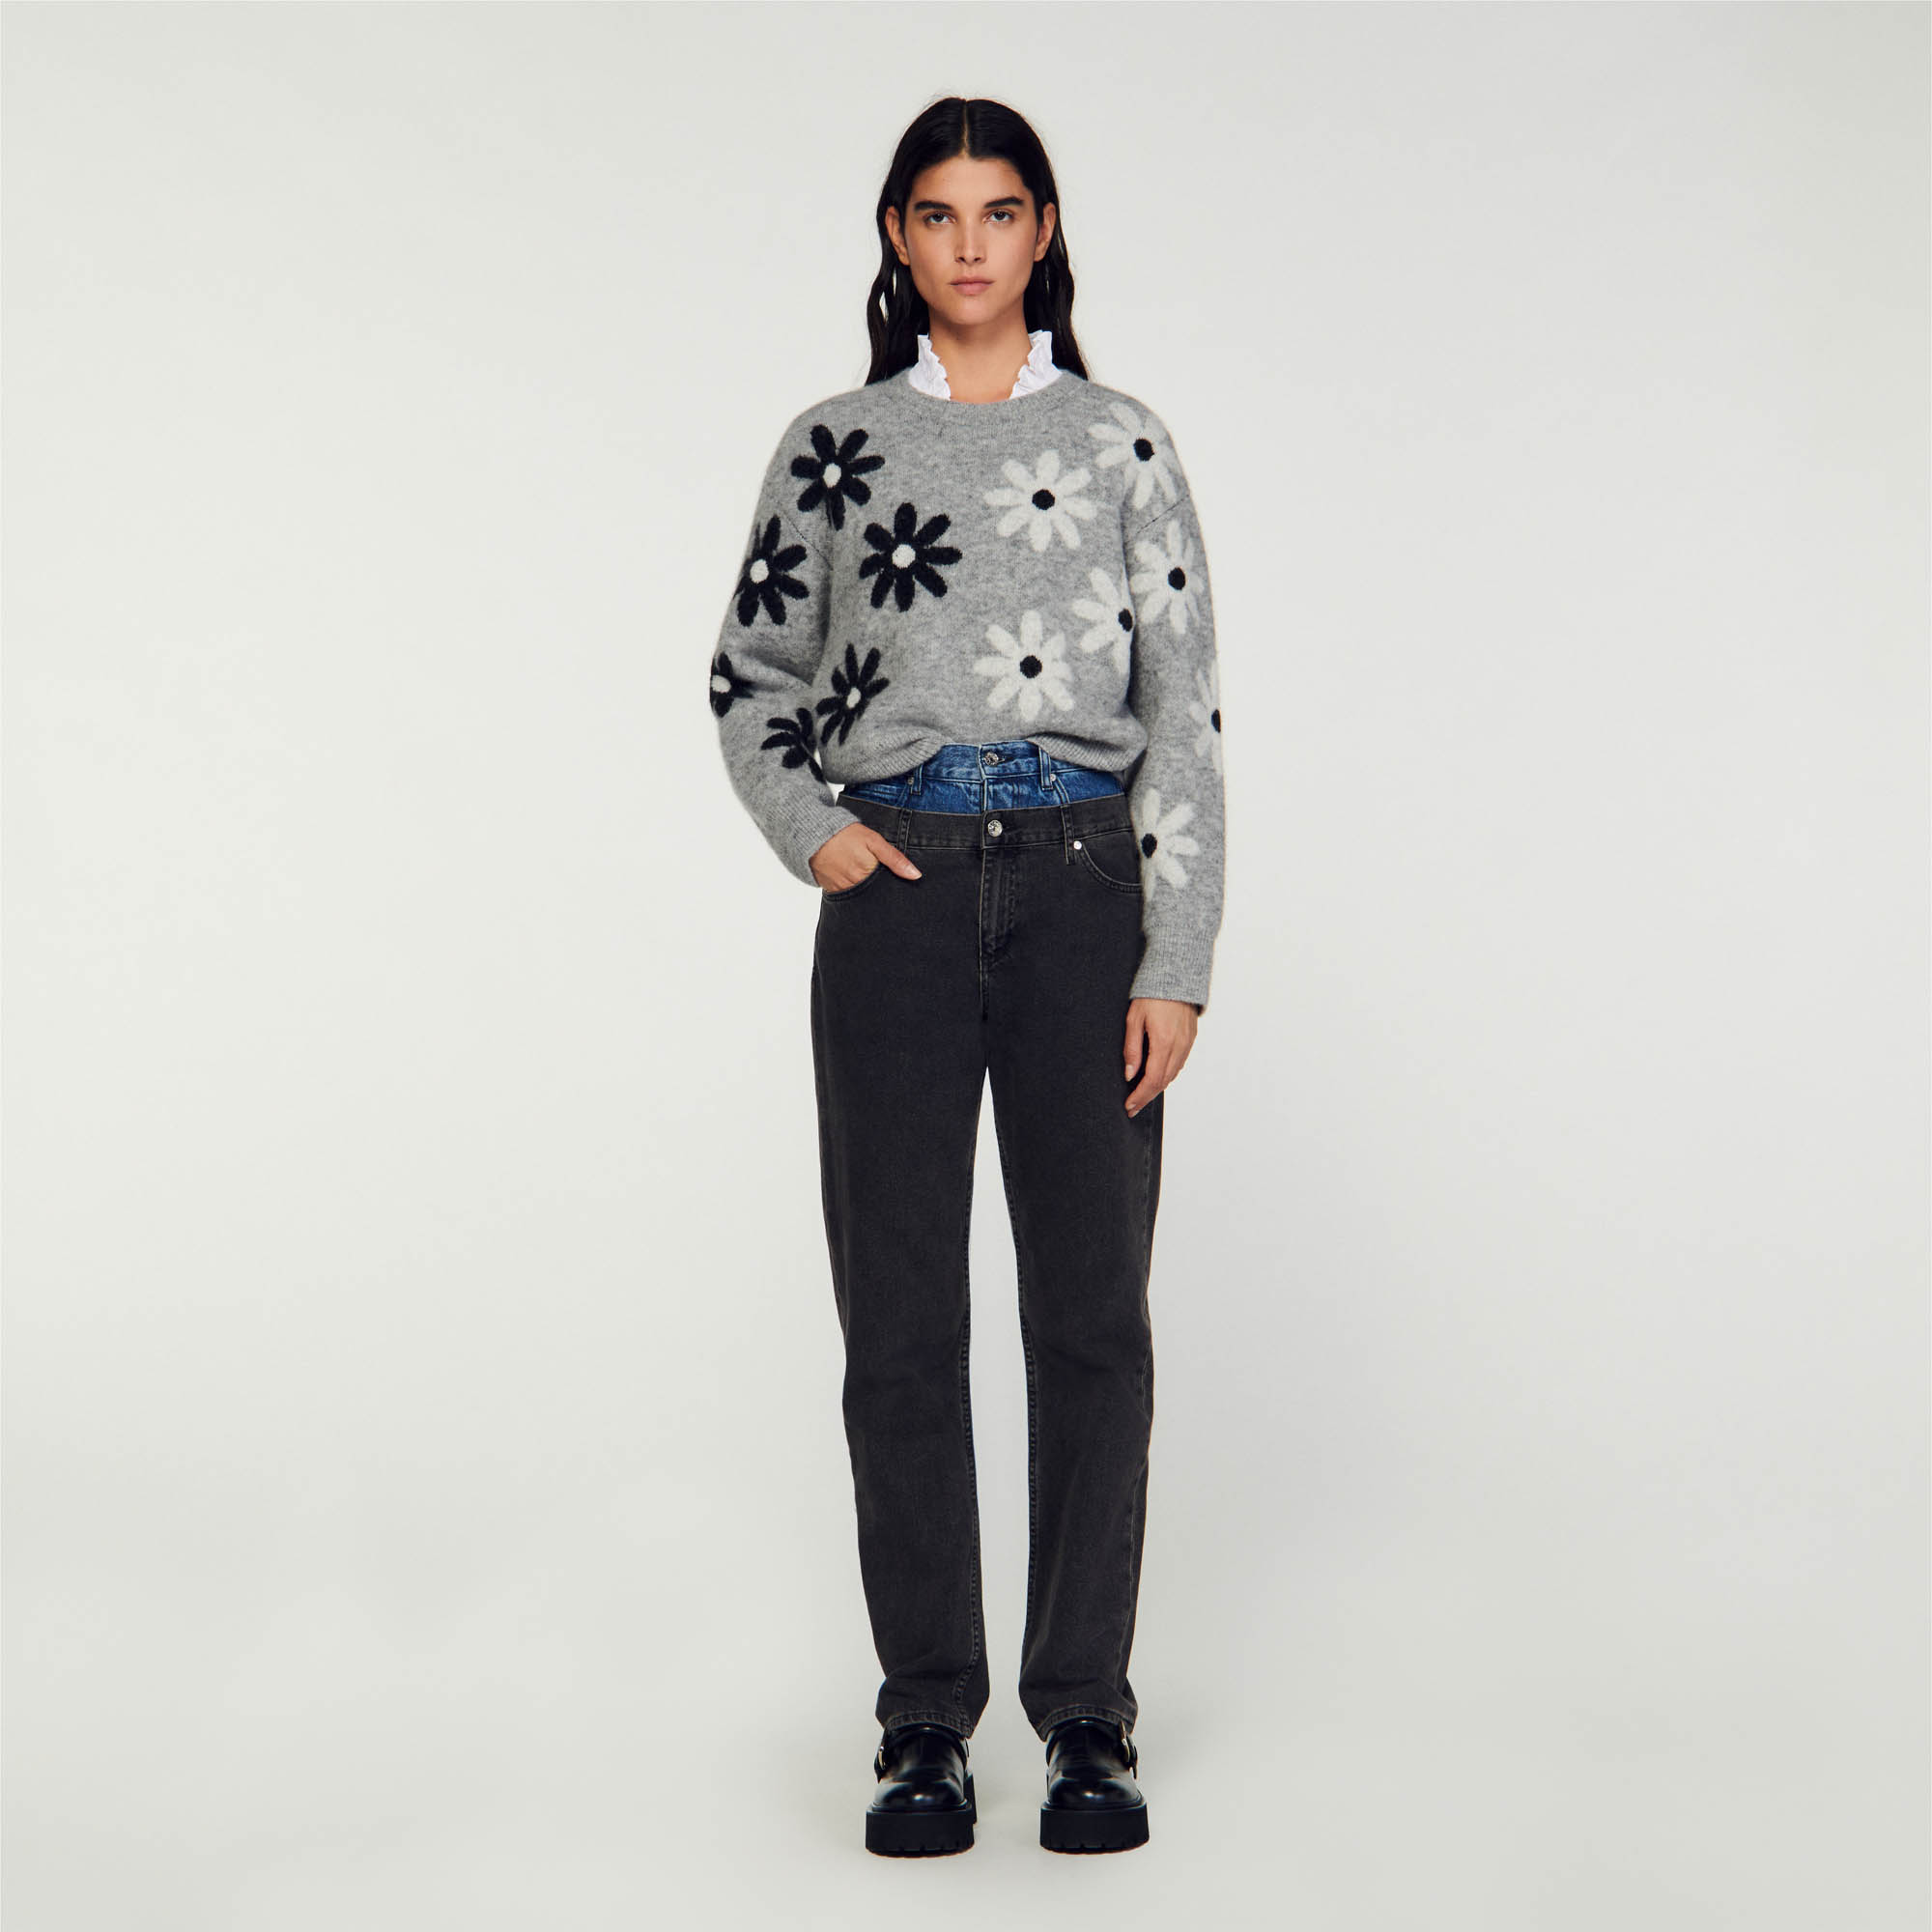 Sandro wool Knitted wool and alpaca sweater, with round neck, long sleeves and embellished with XXL floral fancy knit pattern